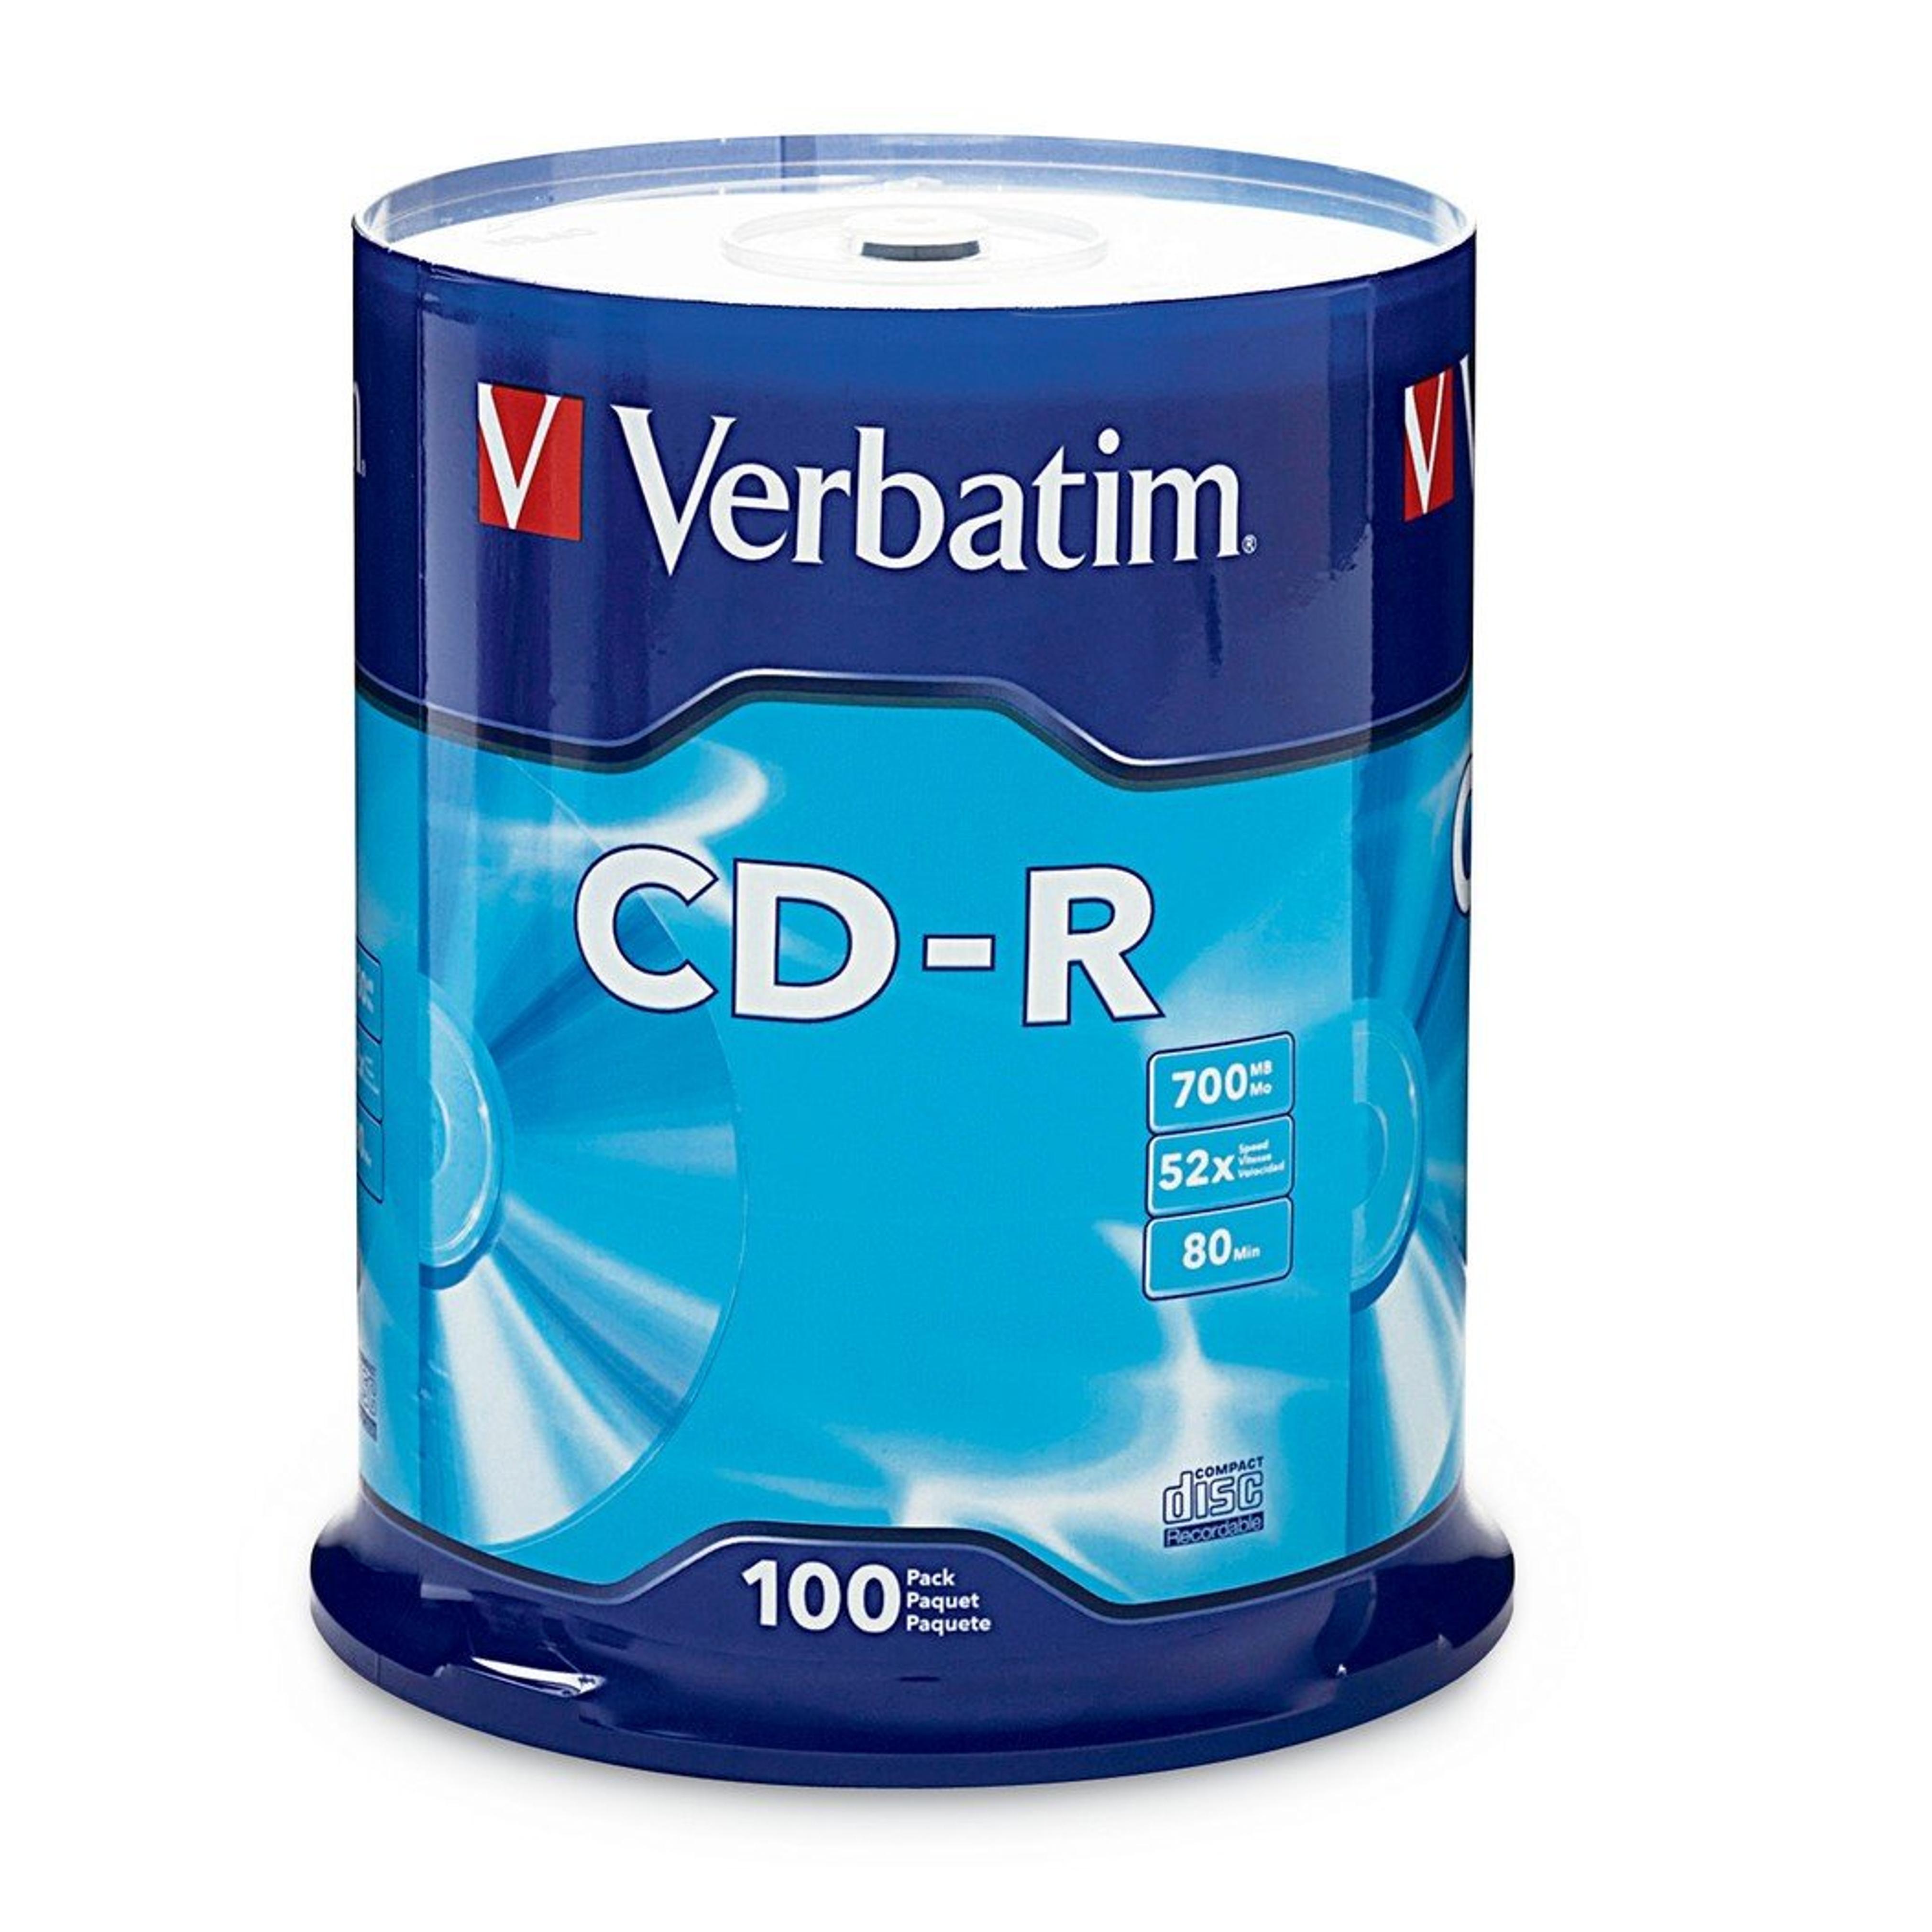 Verbatim CD-R Blank Discs 700MB 80 Minutes 52X Recordable Disc for Data and Music - 100pk Spindle Frustration Free Packaging,Blue 100-Disc Frustration-Free Packaging